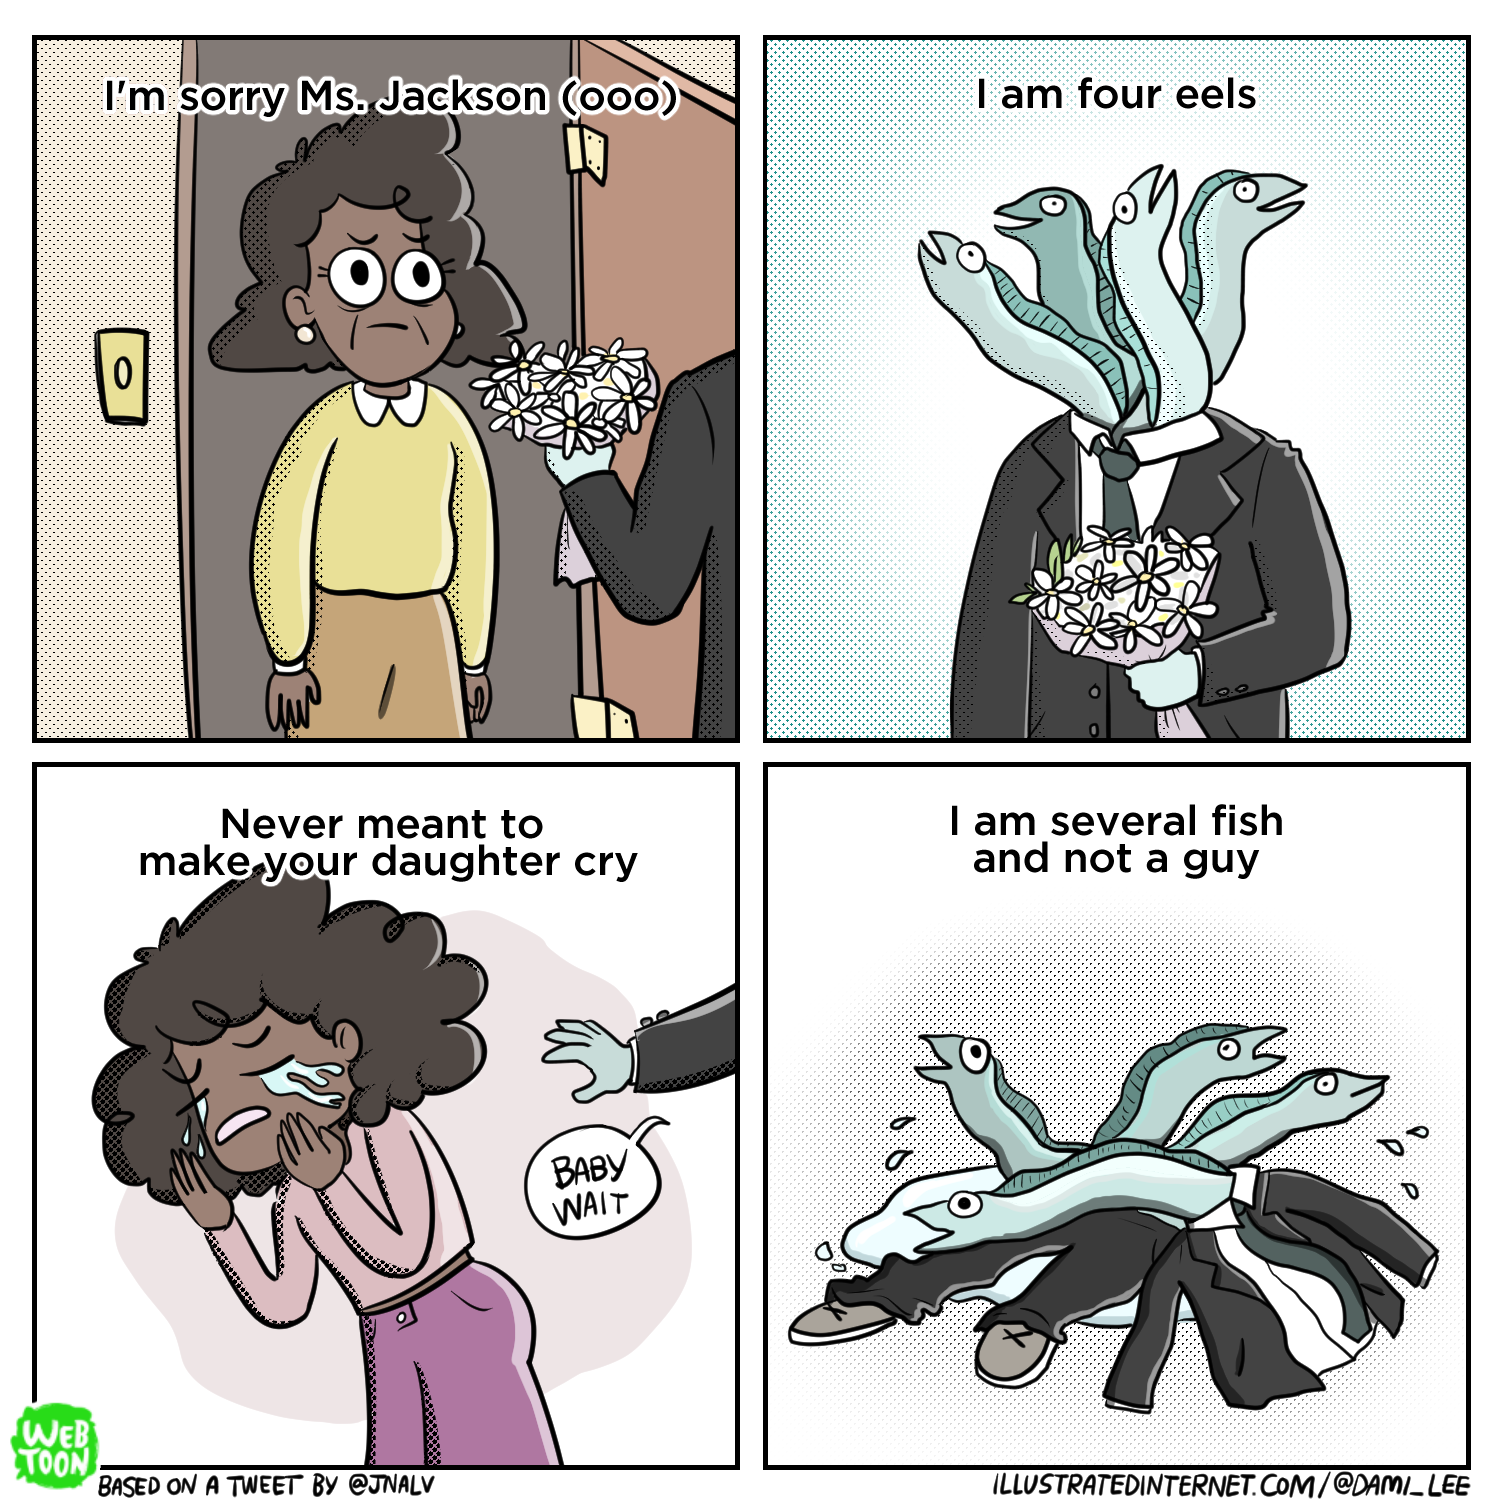 Funny 4-panel webcomic of alternative lyrics for I Am Sorry Ms. Jackson song by Outkast